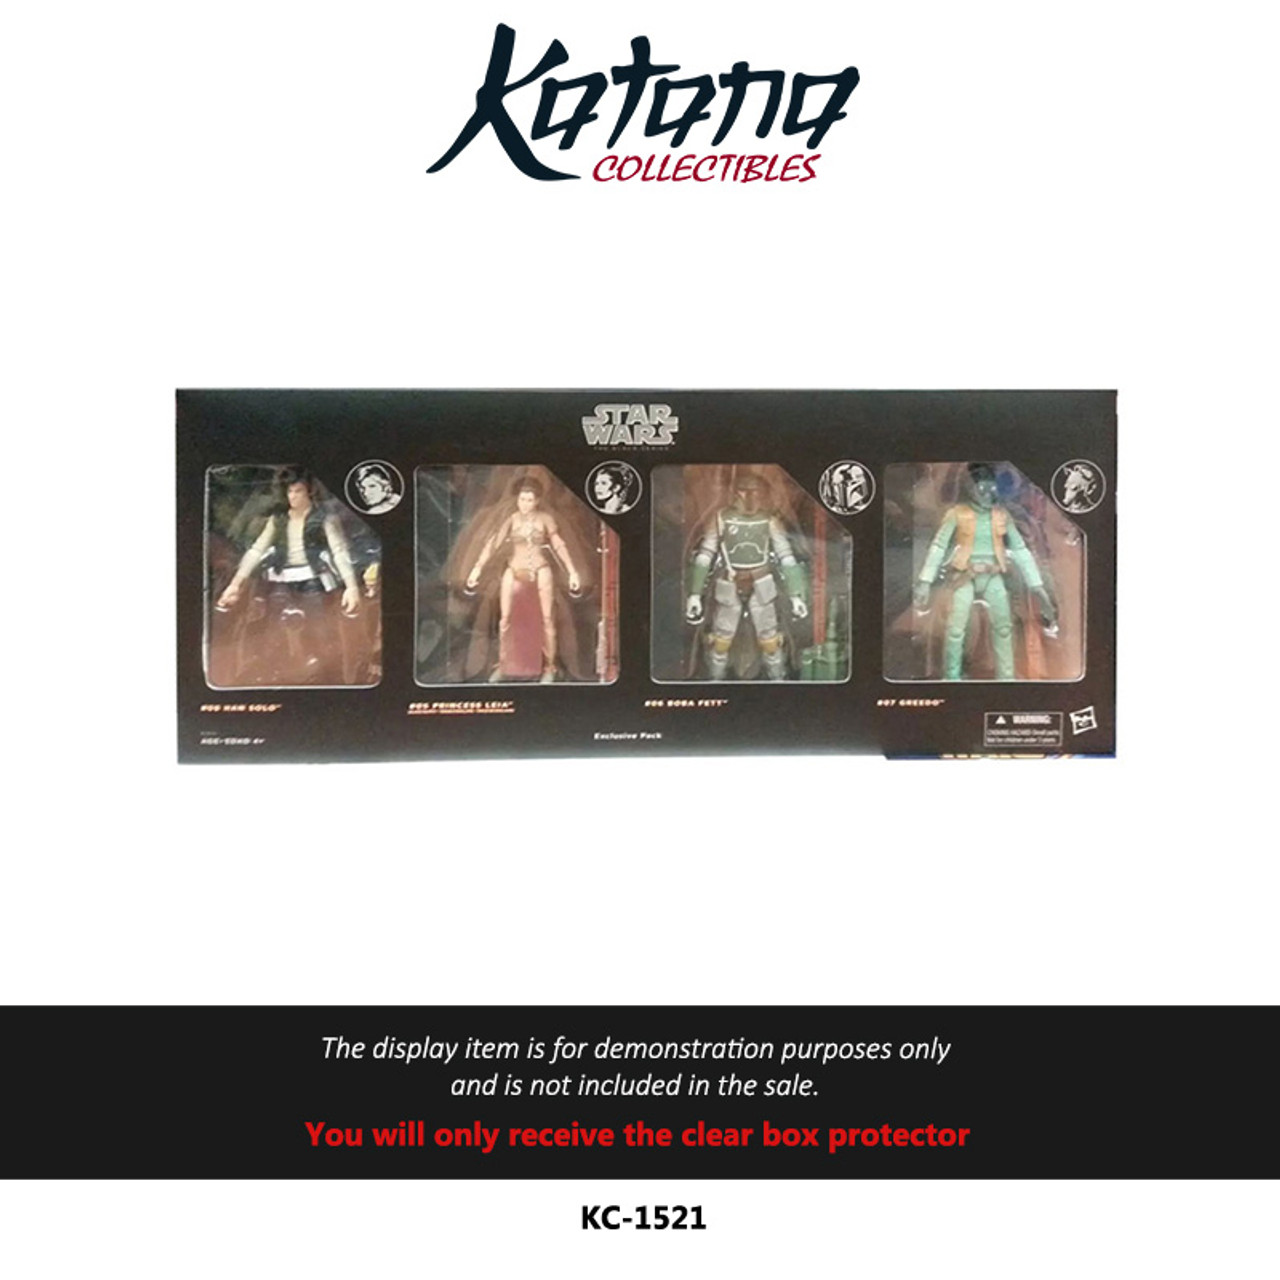 Katana Collectibles Protector For Star Wars Black Series Mexico Walmart exclusive 4-pack